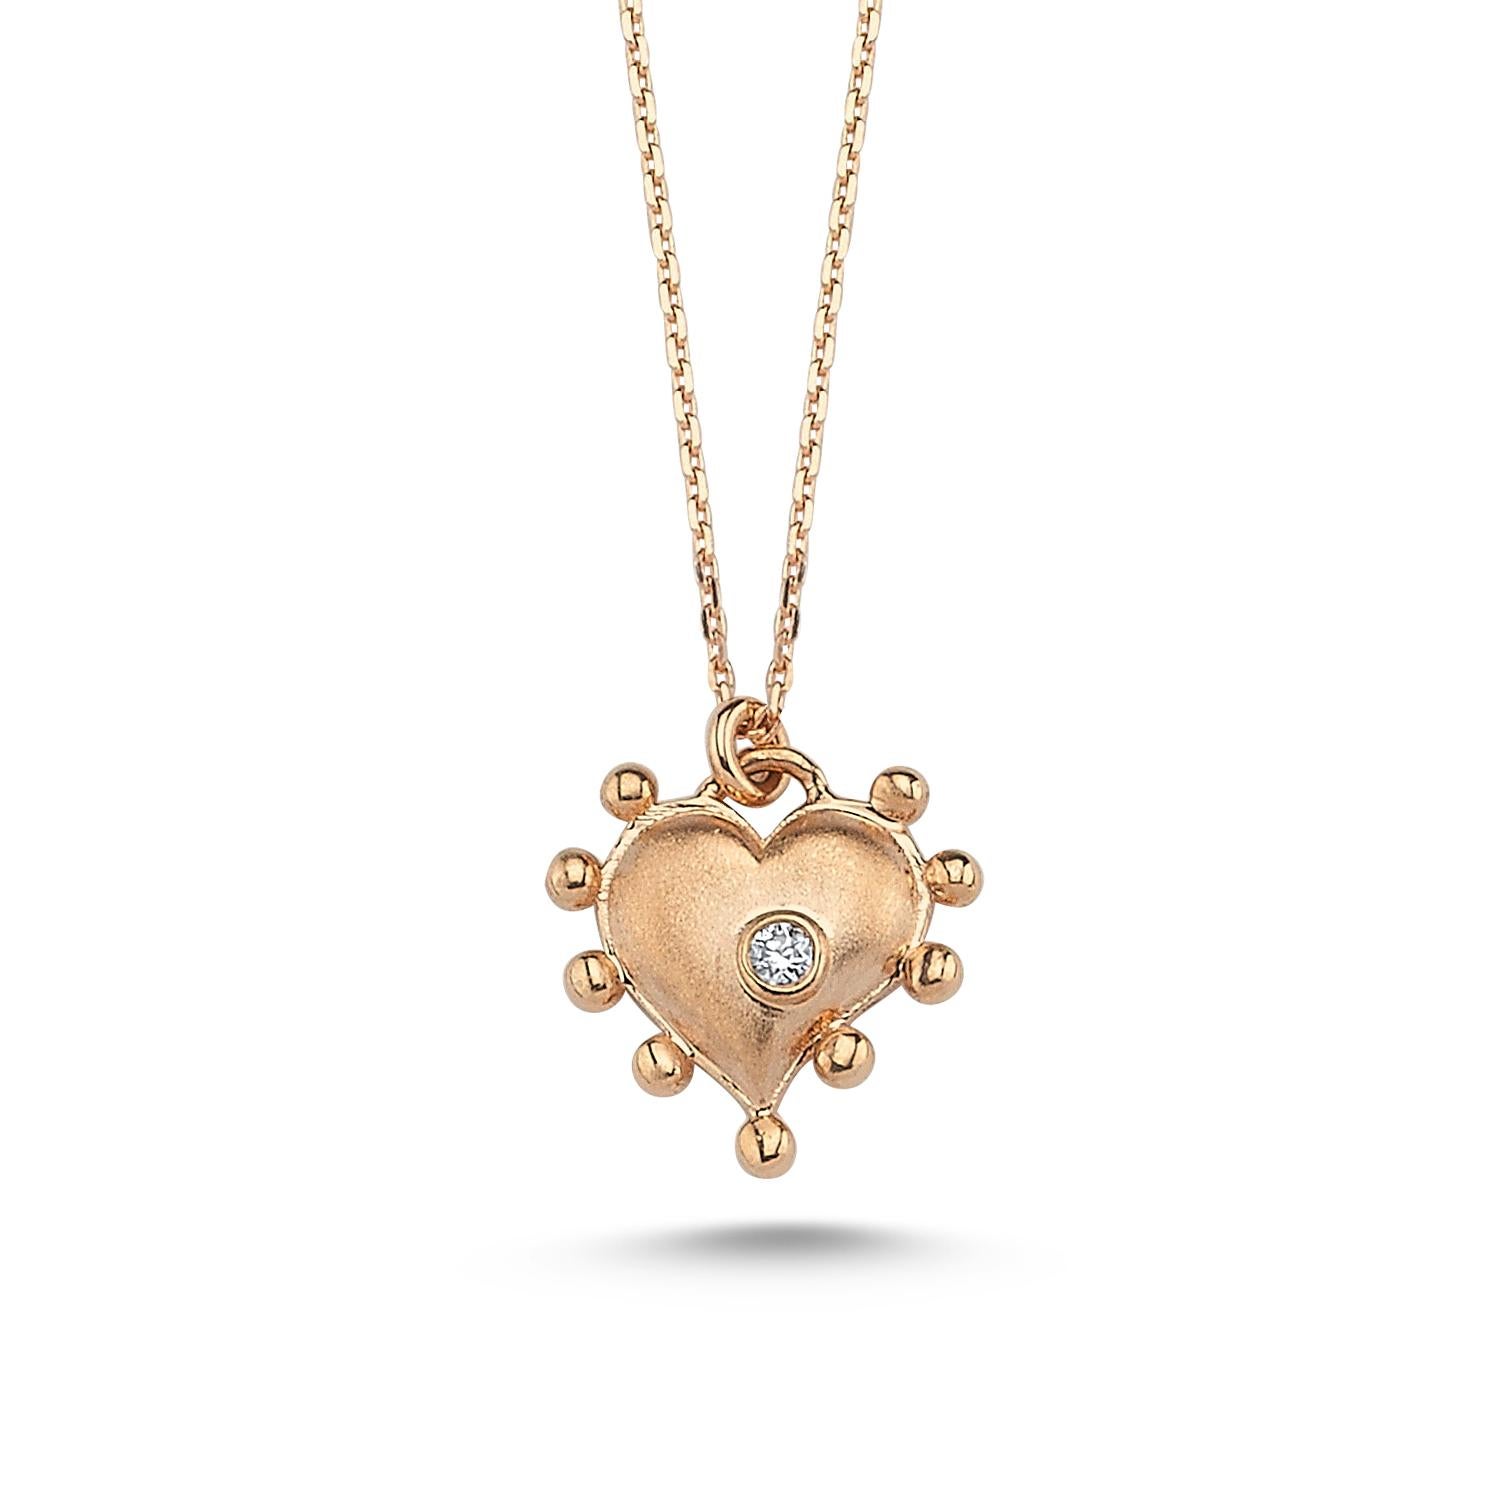 Heart necklace in 14k rose gold with 0.01ct white diamond by Selda Jewellery

Additional Information:-
Collection: Art of giving collection
14K Rose gold
0.01ct White diamond
Pendant height 1cm
Chain length 42cm